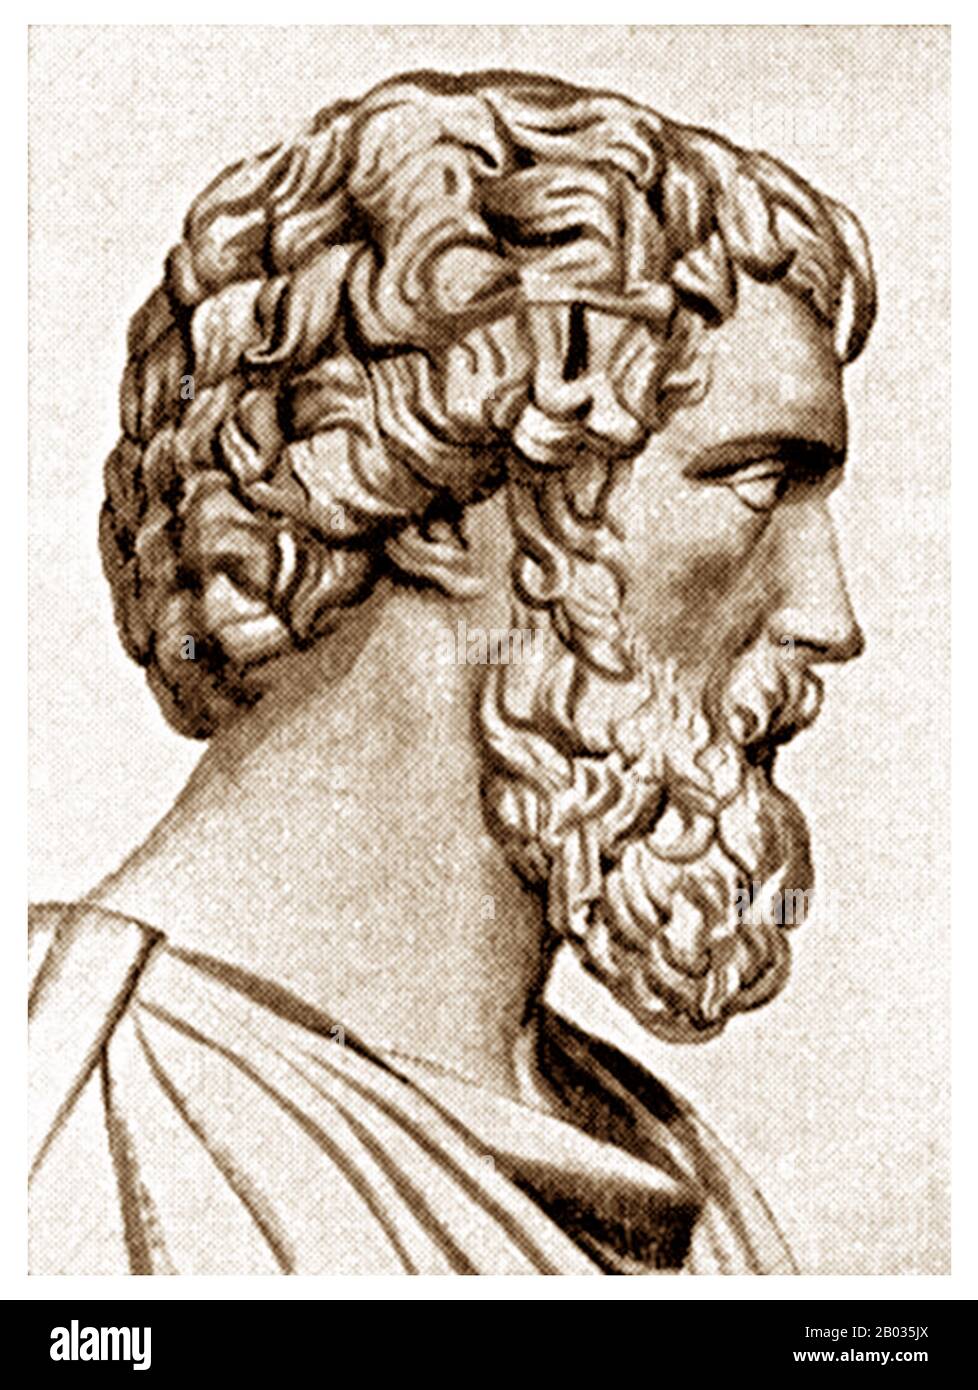 Didius Julianus (133/137-193 CE) was raised by Domitia Lucilla, the mother of emperor Marcus Aurelius, and was groomed for public office and distinction. He served in the Roman army, and was raised to consulship alongside Pertinax in 175 CE for his successes against the Germanic tribes.  After the Praetorian Guard murdered Pertinax in March 193 CE, they put the imperial throne up for bidding, willing to sell it to whomever could pay the most. Julianus won the bidding war, and was declared as Caesar and emperor, with the Senate formalising the declaration under military threat. His controversia Stock Photo